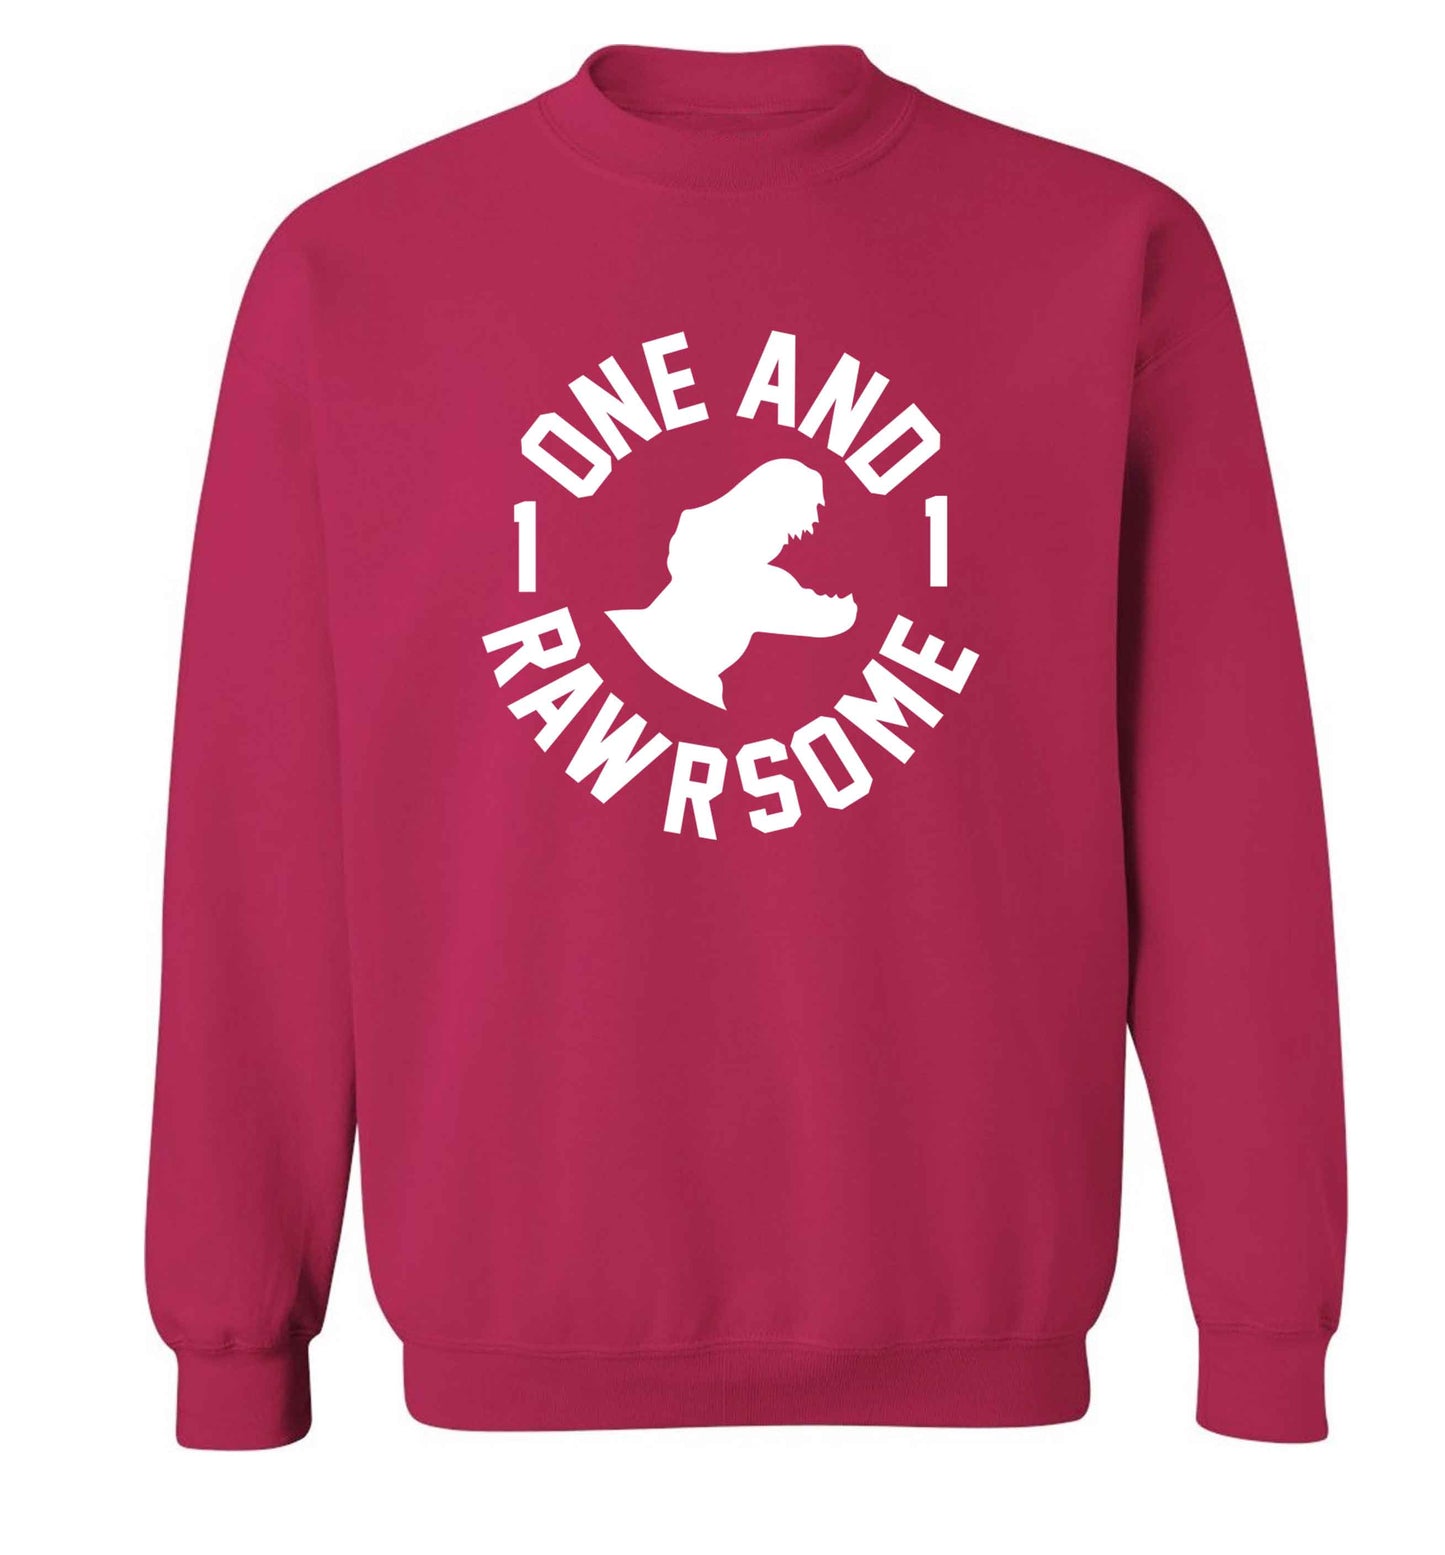 One and Rawrsome adult's unisex pink sweater 2XL